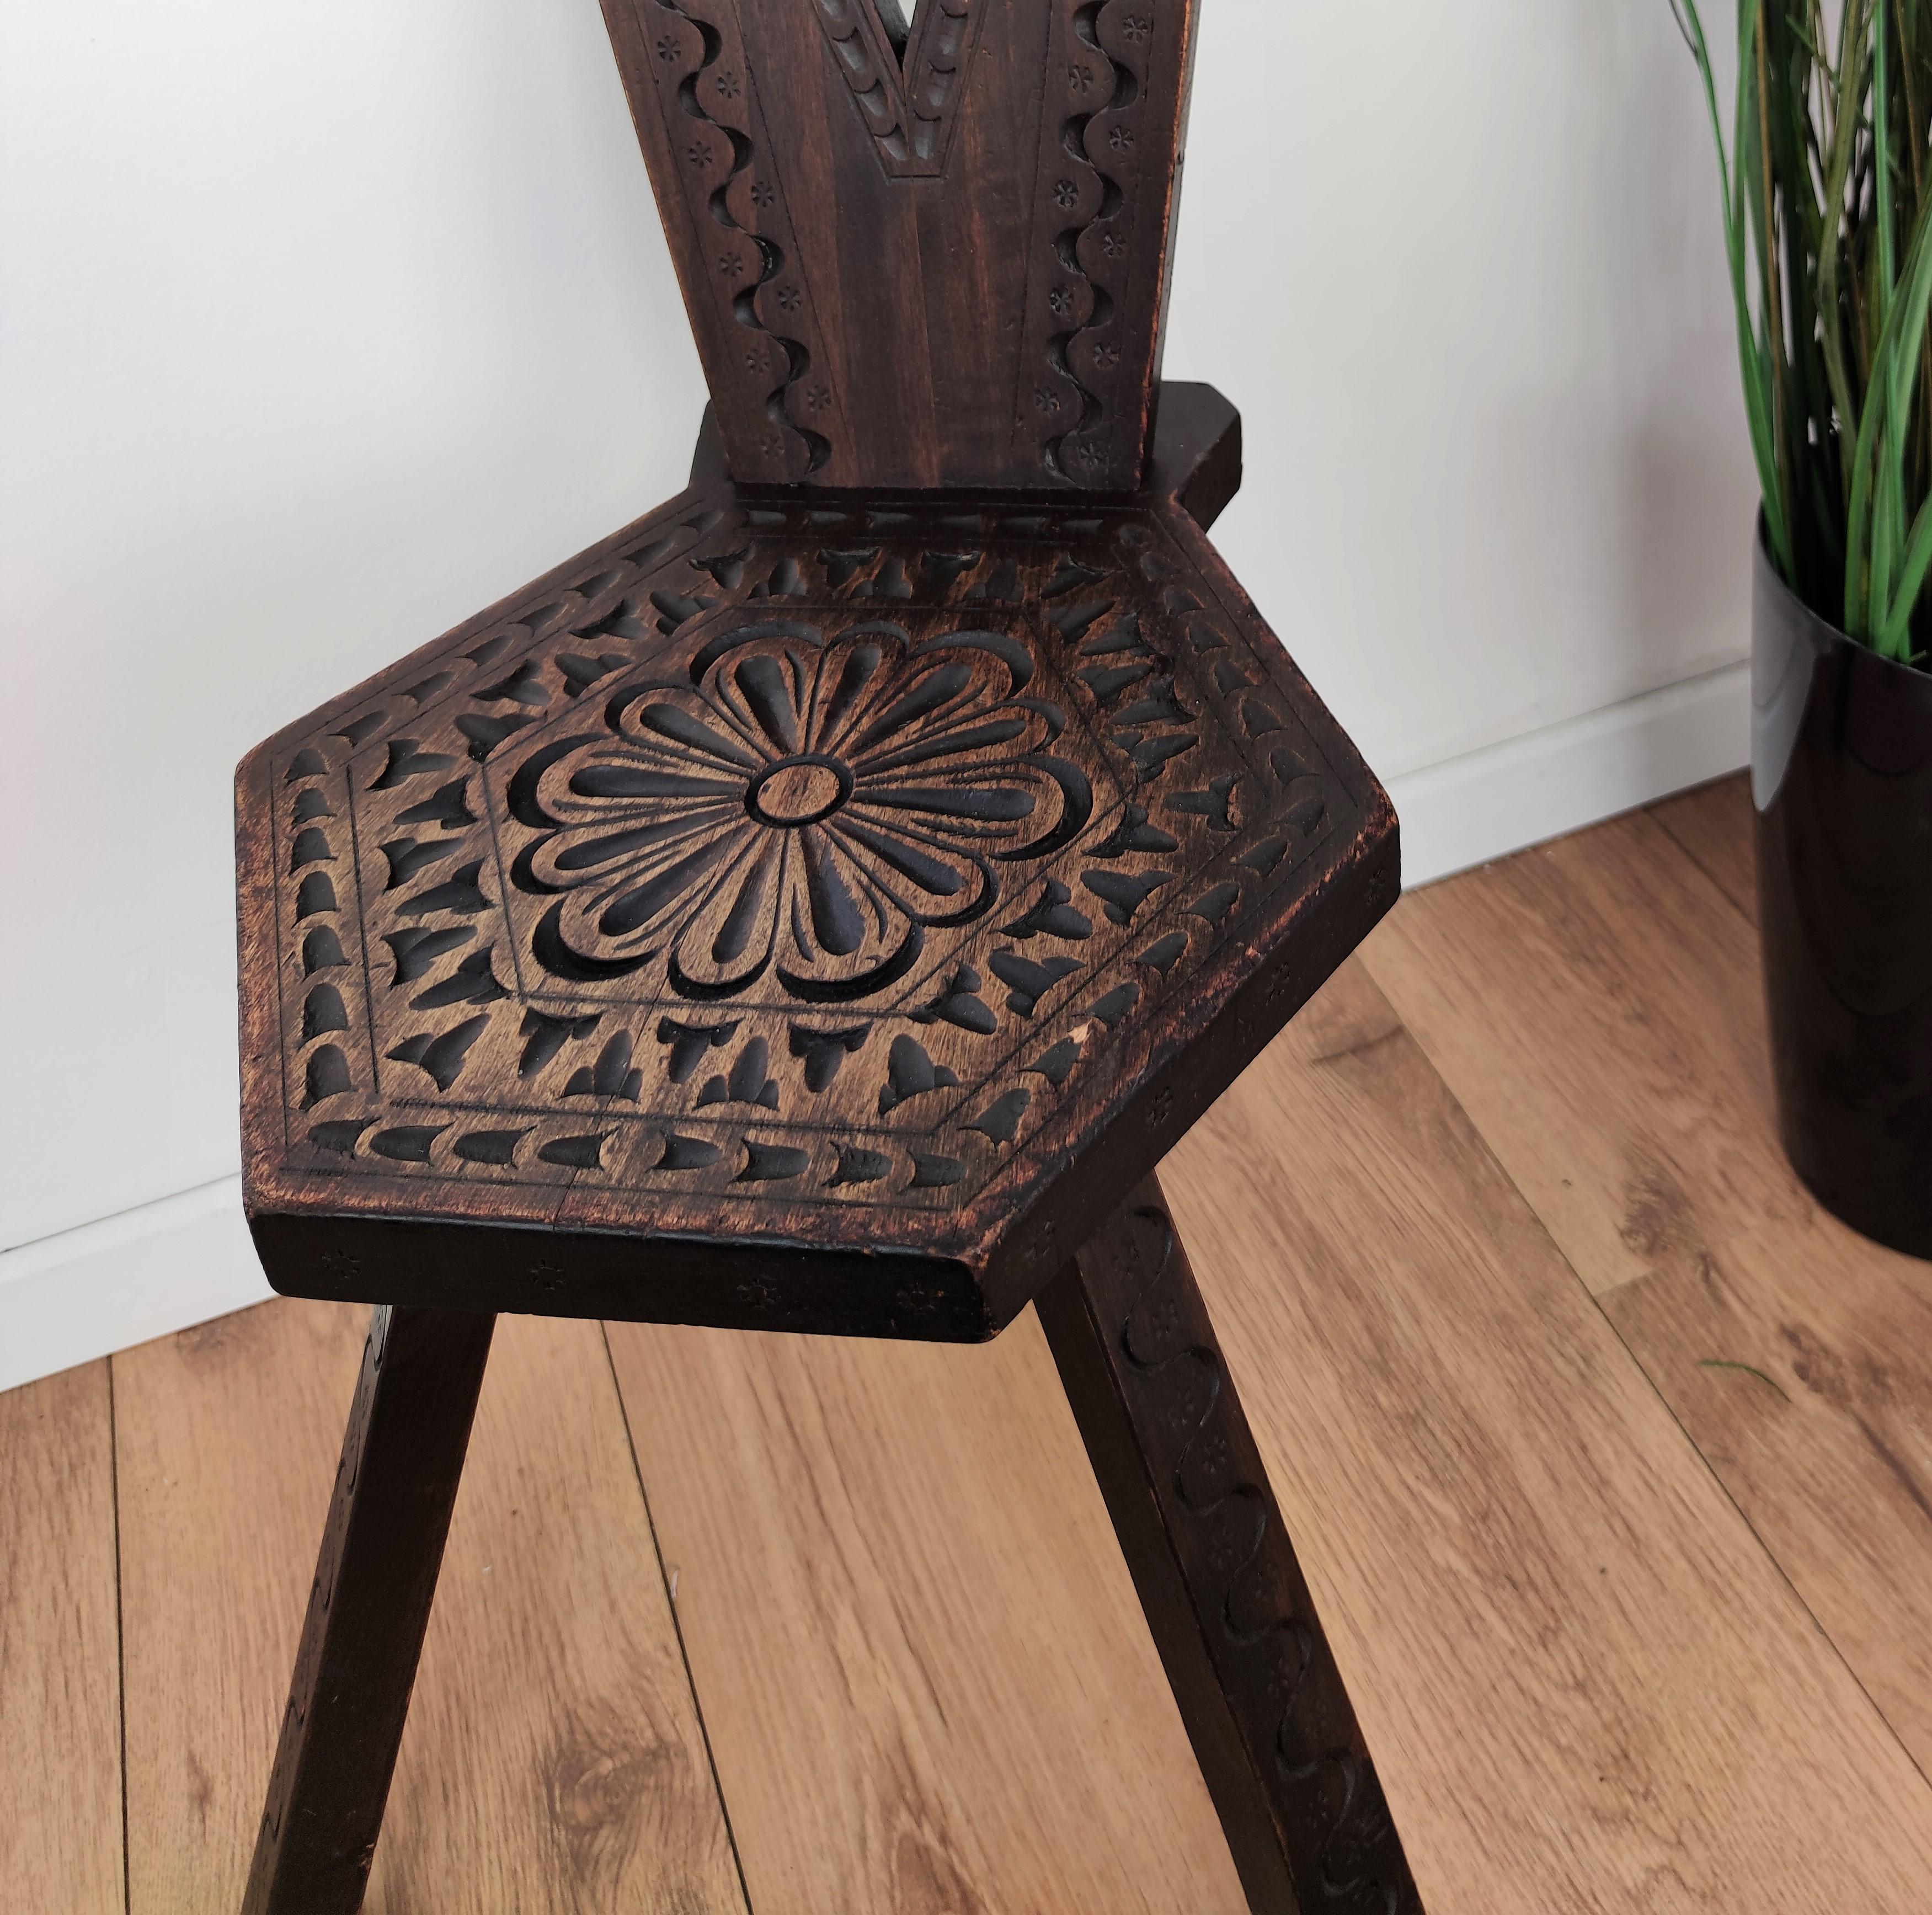 Hand-Carved Antique Italian Carved Wood Round Tripod Chair 